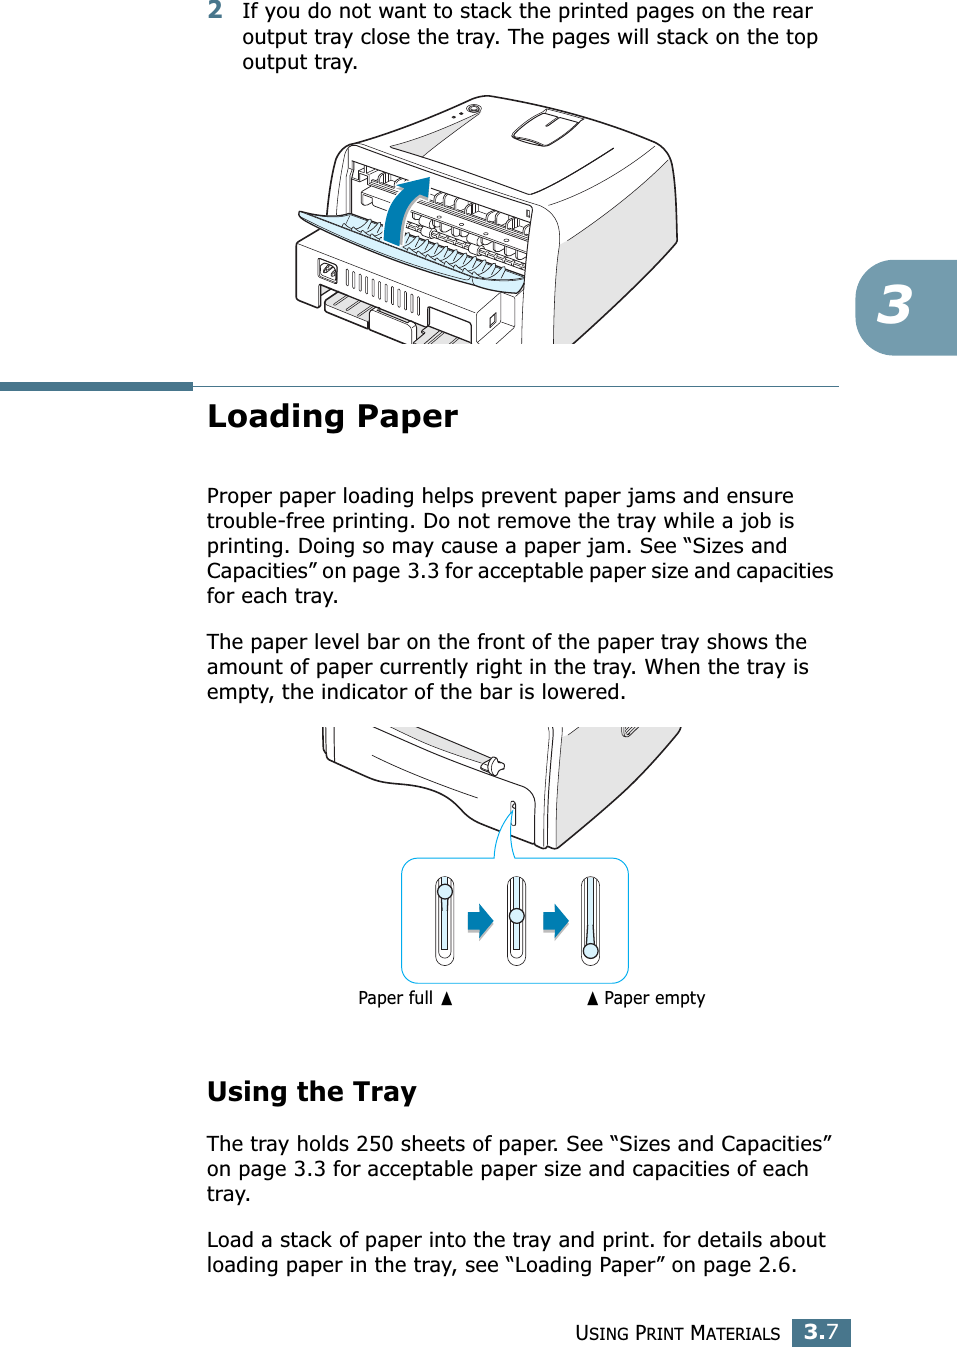 USING PRINT MATERIALS3.732If you do not want to stack the printed pages on the rear output tray close the tray. The pages will stack on the top output tray.Loading PaperProper paper loading helps prevent paper jams and ensure trouble-free printing. Do not remove the tray while a job is printing. Doing so may cause a paper jam. See “Sizes and Capacities” on page 3.3 for acceptable paper size and capacities for each tray. The paper level bar on the front of the paper tray shows the amount of paper currently right in the tray. When the tray is empty, the indicator of the bar is lowered.Using the TrayThe tray holds 250 sheets of paper. See “Sizes and Capacities” on page 3.3 for acceptable paper size and capacities of each tray.Load a stack of paper into the tray and print. for details about loading paper in the tray, see “Loading Paper” on page 2.6. Paper full ➐➐☎Paper empty